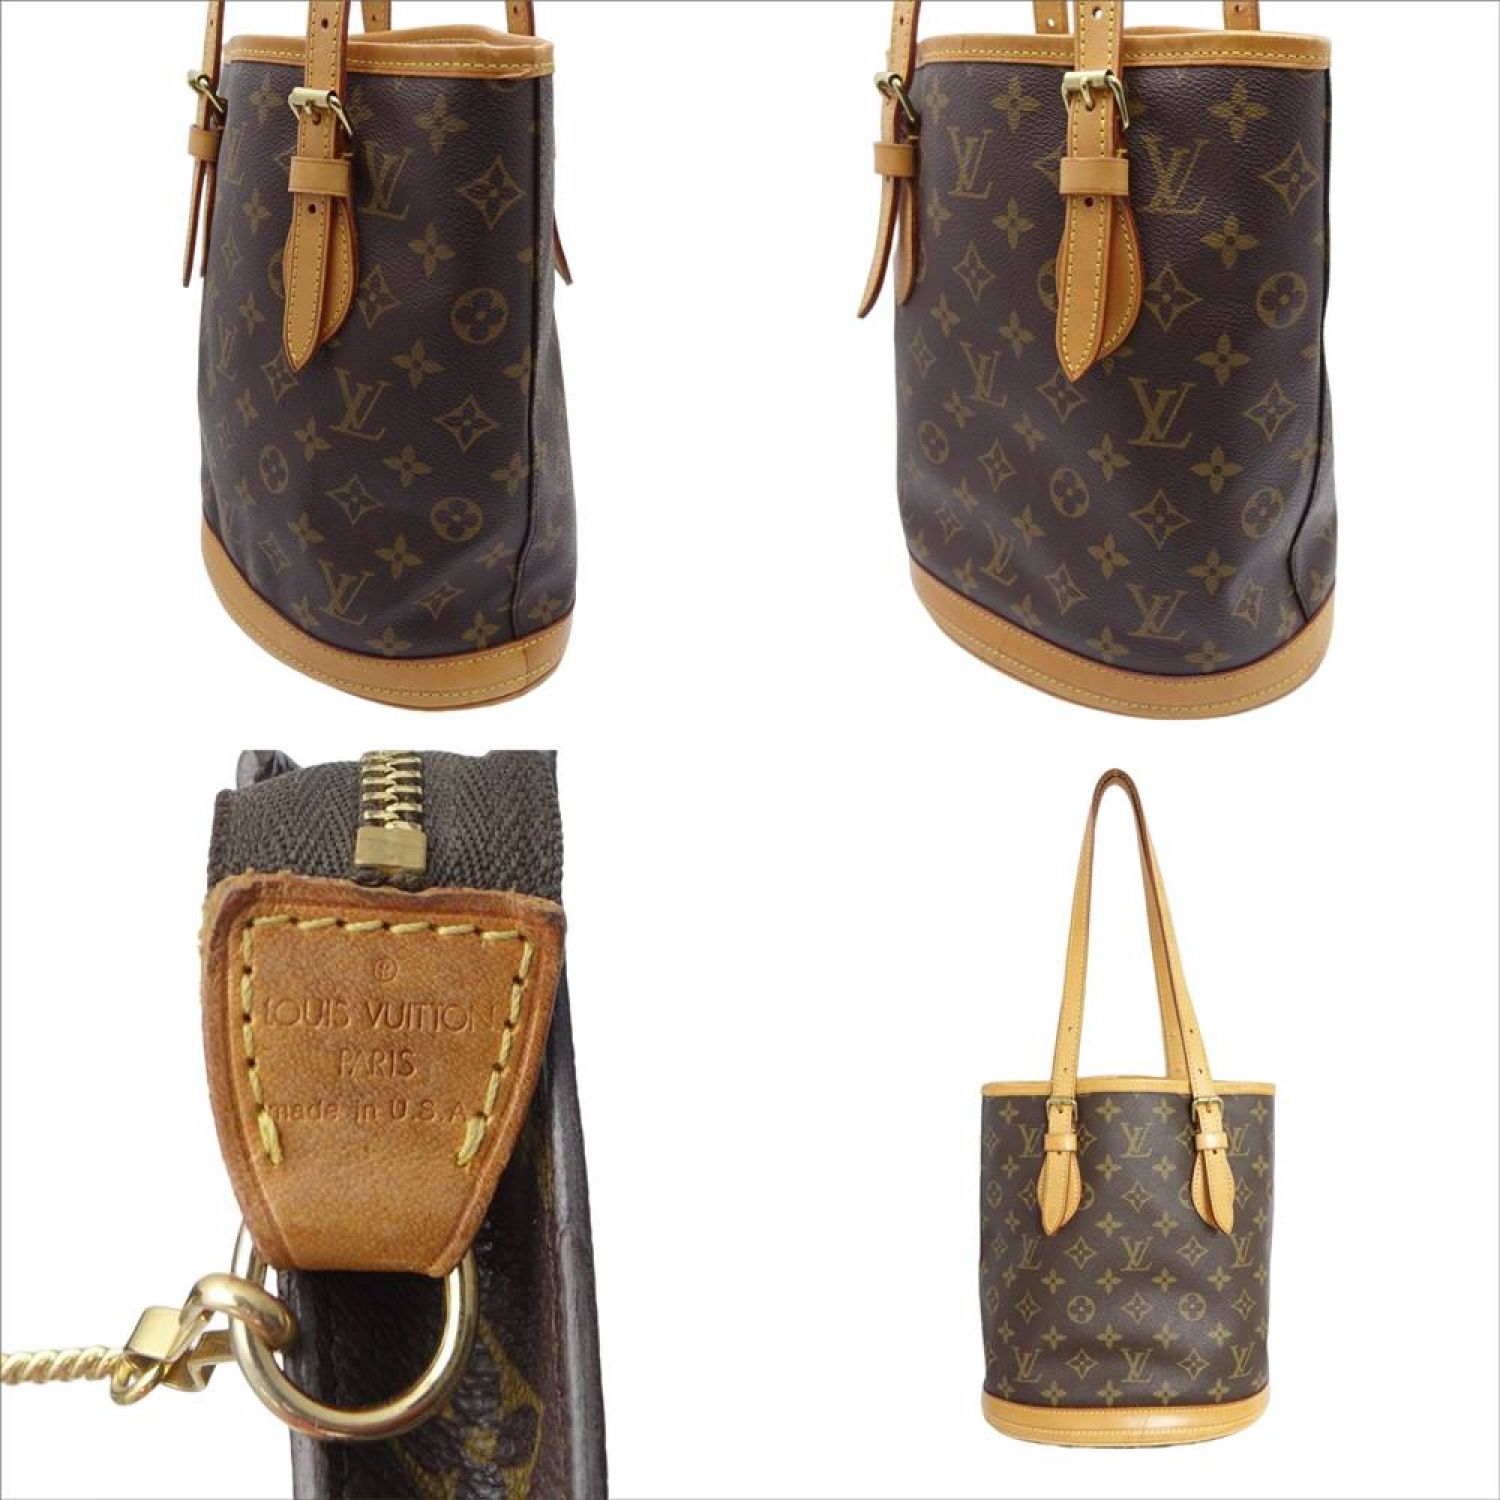 ◇◇LOUIS VUITTON ルイヴィトン プチバケット 布袋付 M42238